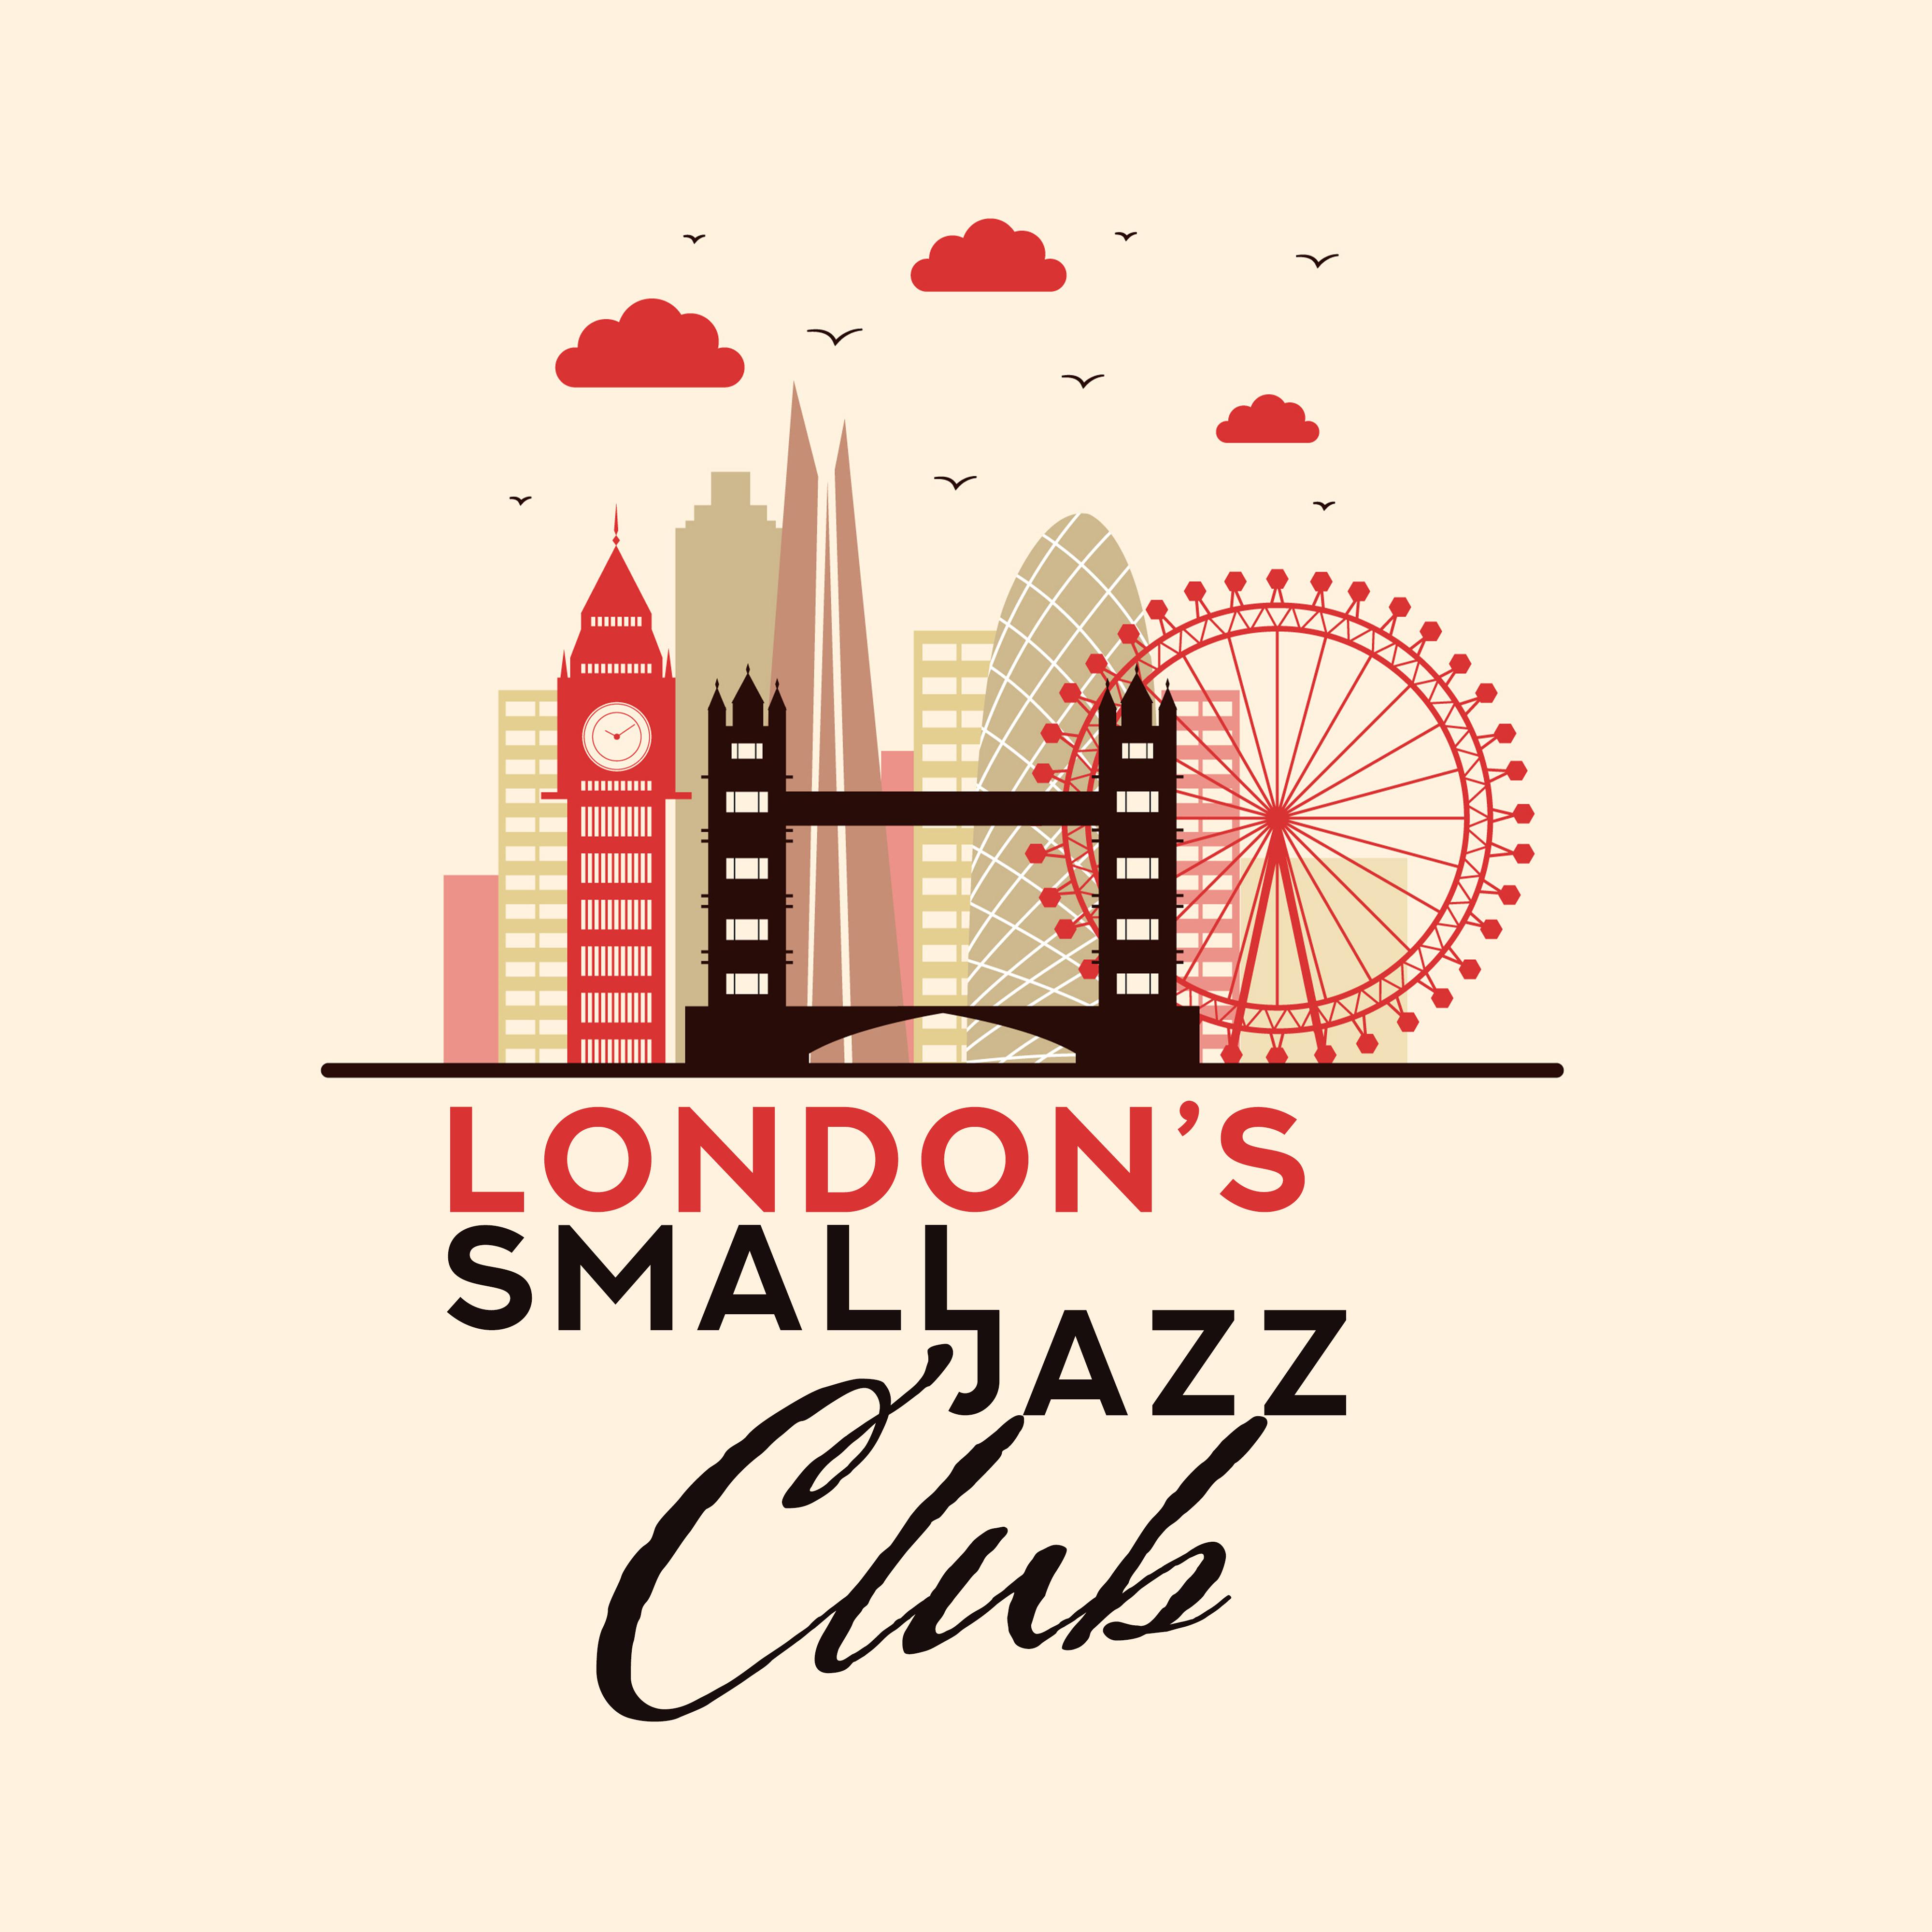 London' s Small Jazz Club: 2019 Fresh Instrumental Smooth Jazz Music for Jazz Clubs, Restaurants or Cafes, Positive Vibes for Good Time Spending, Soft Melodies Played on Piano, Guitar  Contrabass